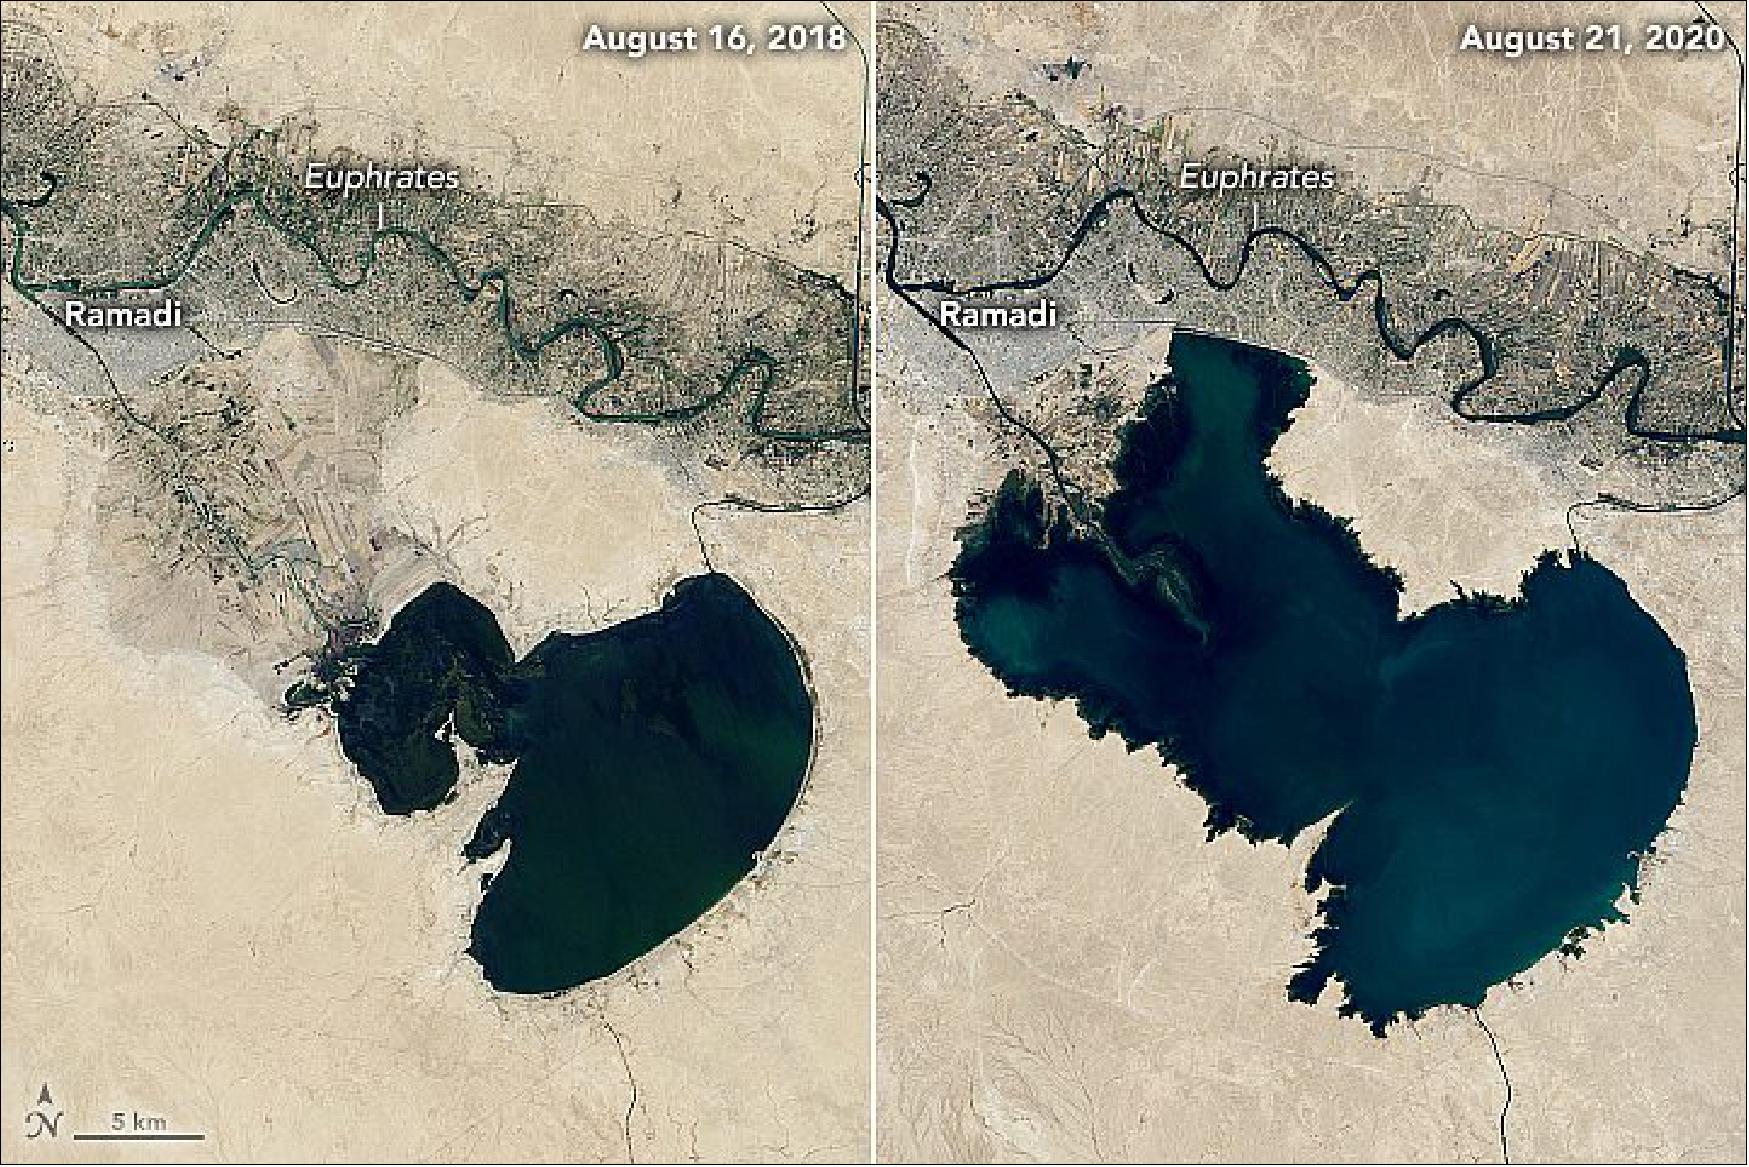 Figure 34: This image shows Habbaniya Lake (also known as Lake Ramadi), as observed by Landsat-8. In the 1980s, Habbaniya was also a popular tourist destination. However, the resort suffered after several conflicts in the 1990s and 2000s. Companies have since tried to revive the vacation spot by rebuilding facilities (image credit: NASA Earth Observatory)